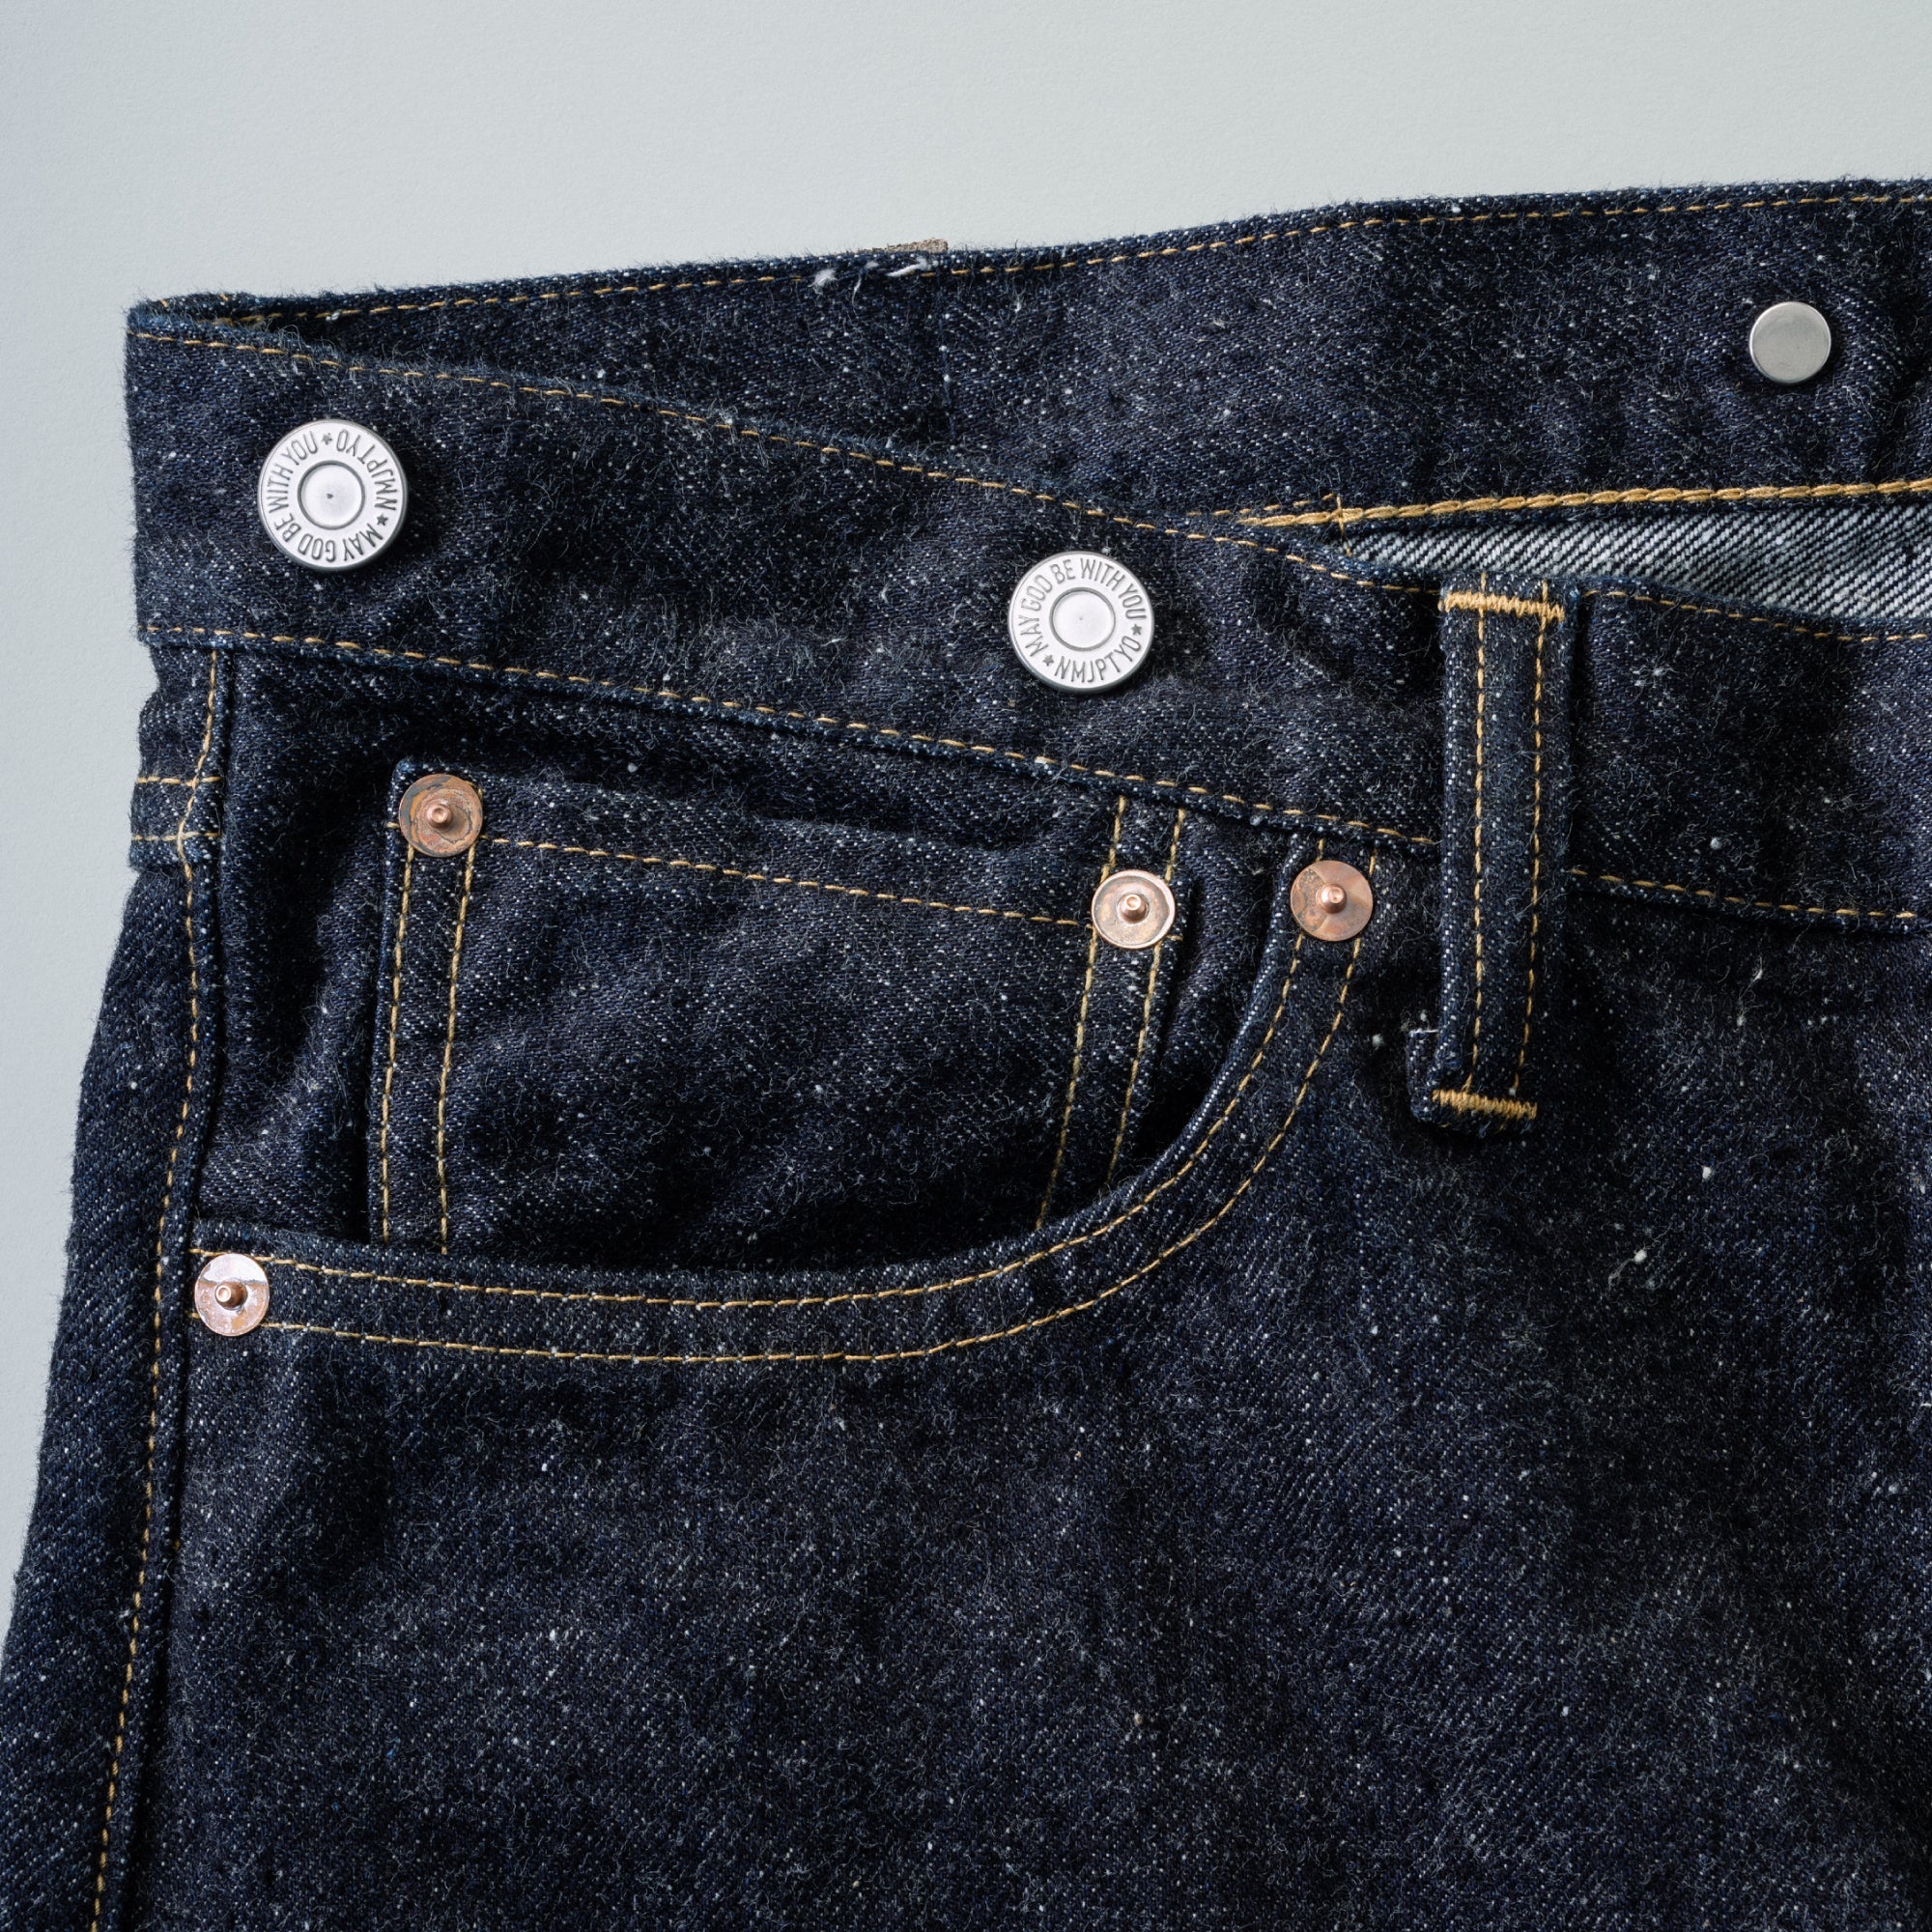 NEW MANUAL #002 1942 LV JEANS ONE-WASHED002